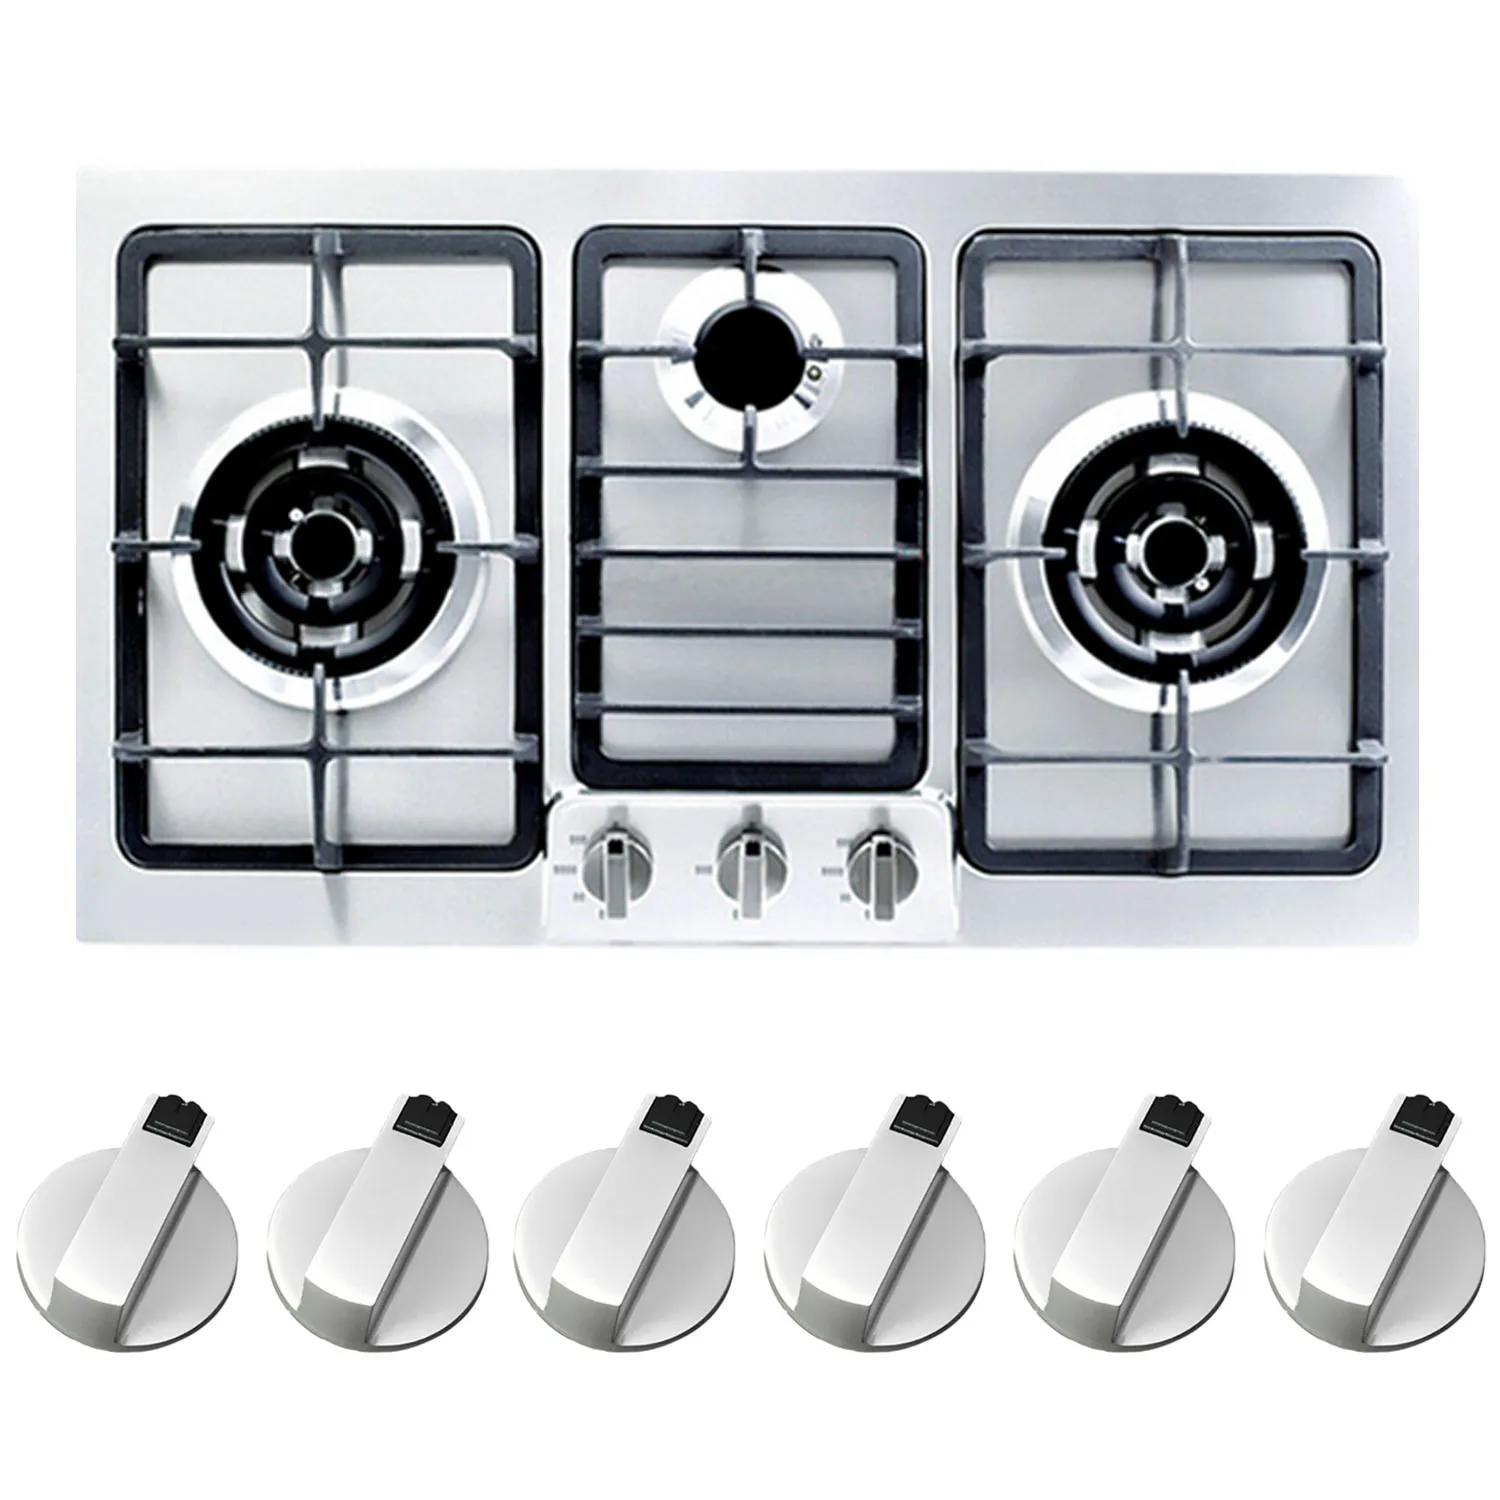 

Behogar 6pcs Metal Universal Silver Gas Stove Control Knobs Adaptors Oven Rotary Switch Cooking Surface Control Locks